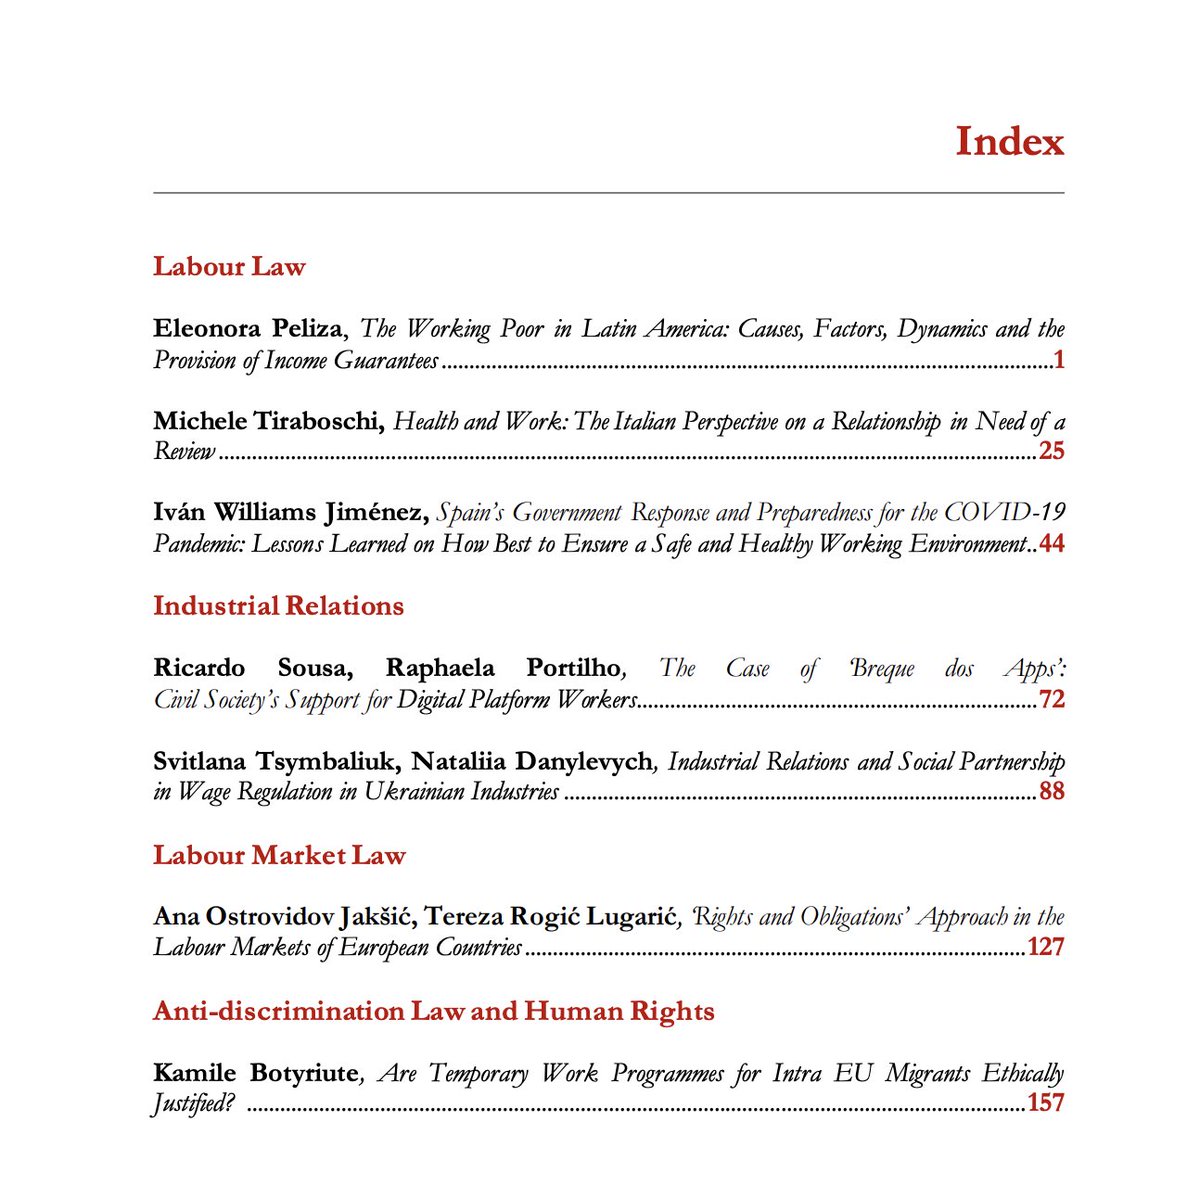 🆕 E-Journal of International and Comparative Labour Studies Vol. 12, No. 2 (2023) ejcls.adapt.it/index.php/ejcl… #LabourLaw #IndustrialRelations #LabourMarket Law #Antidiscrimination Law #HumanRights